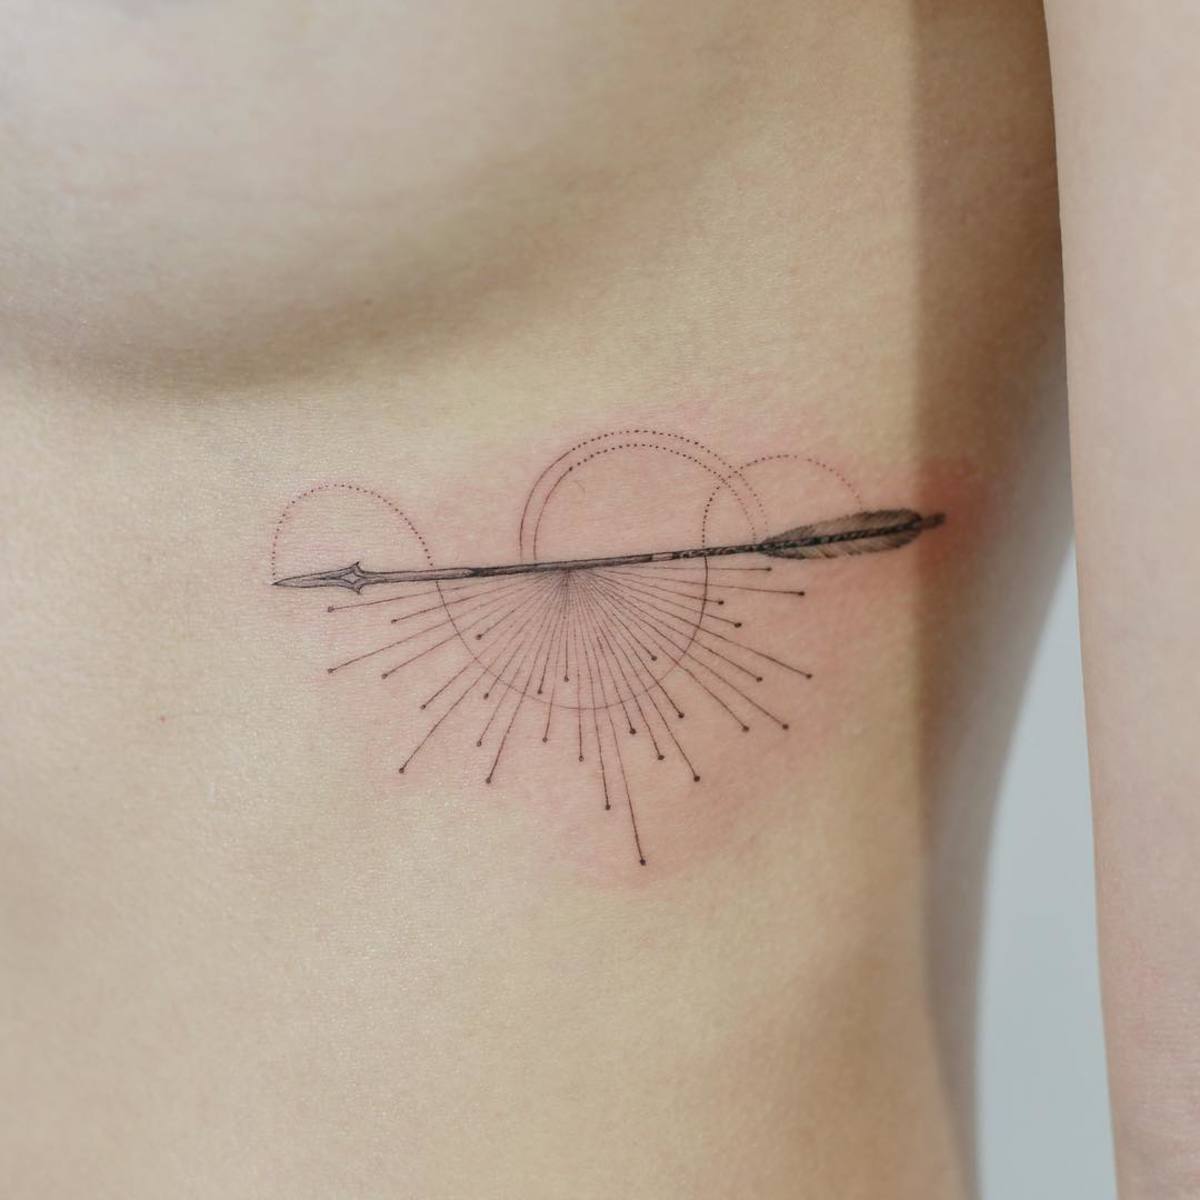 A good tattoo artist can indicate the arrow's movement with ink. (by tattooist_doy)